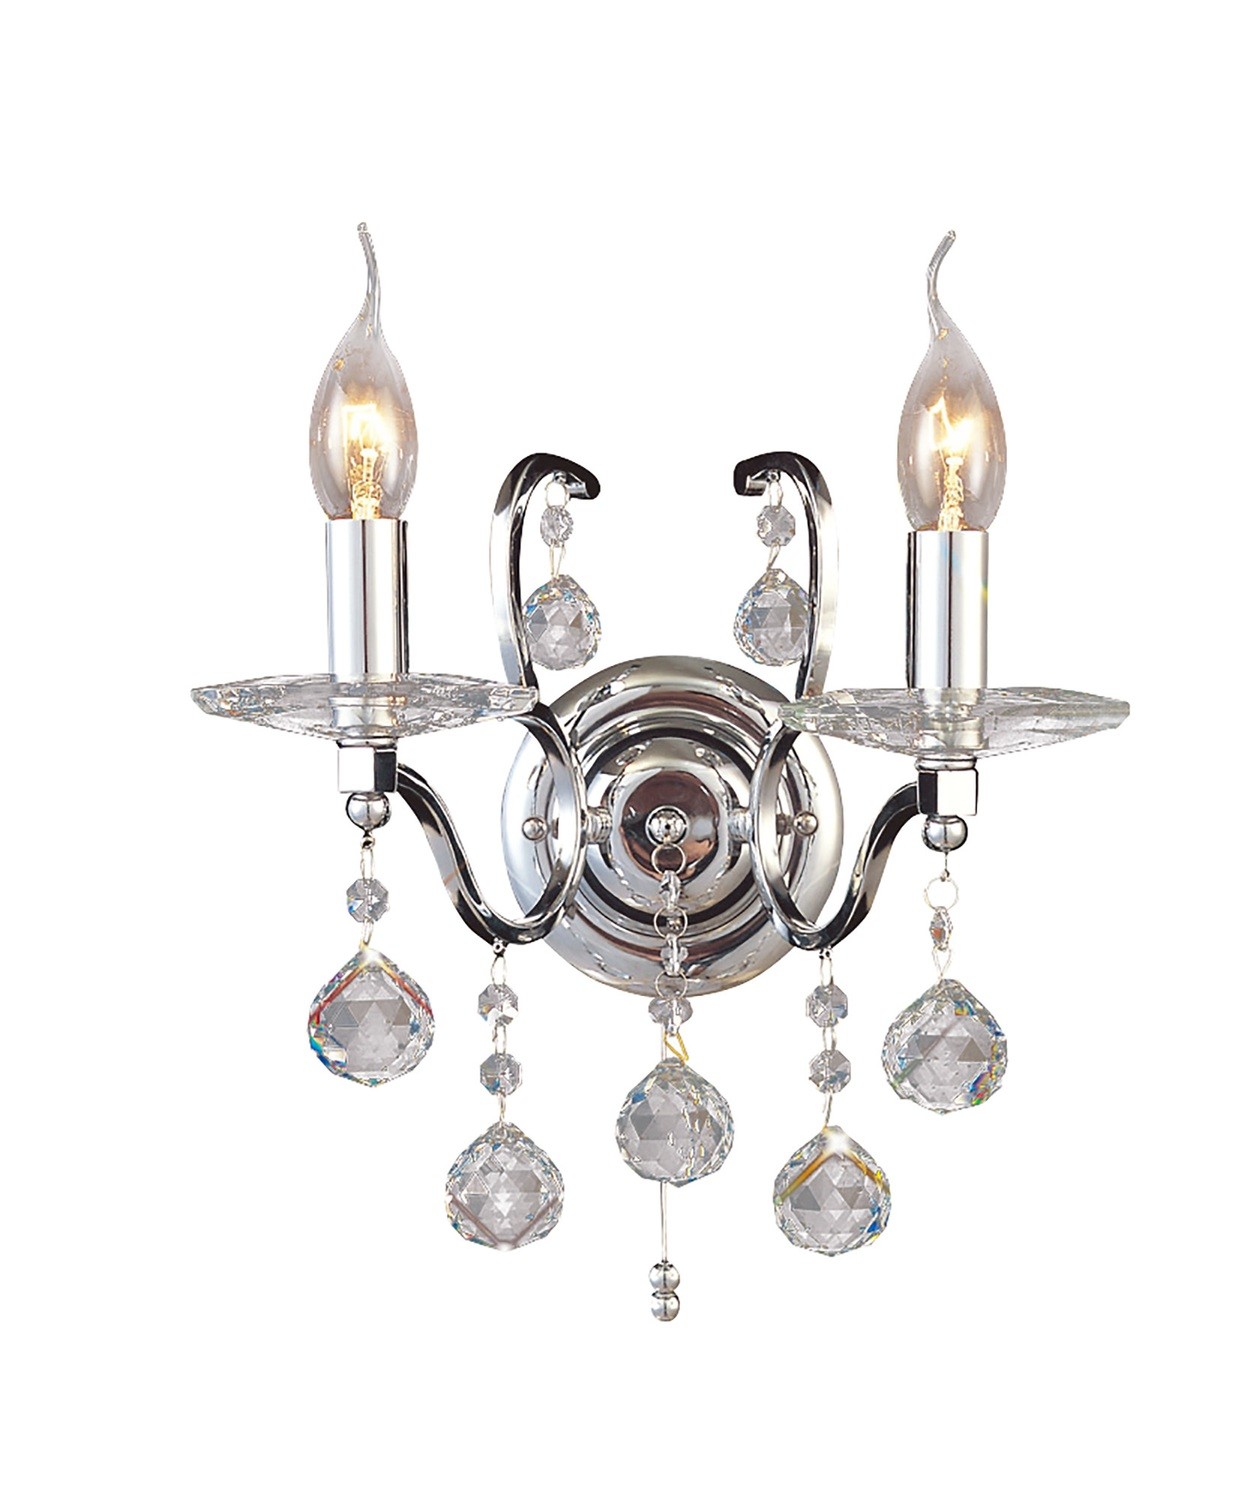 Zinta Wall Lamp Switched 2 Light Switched Polished Chrome/Crystal